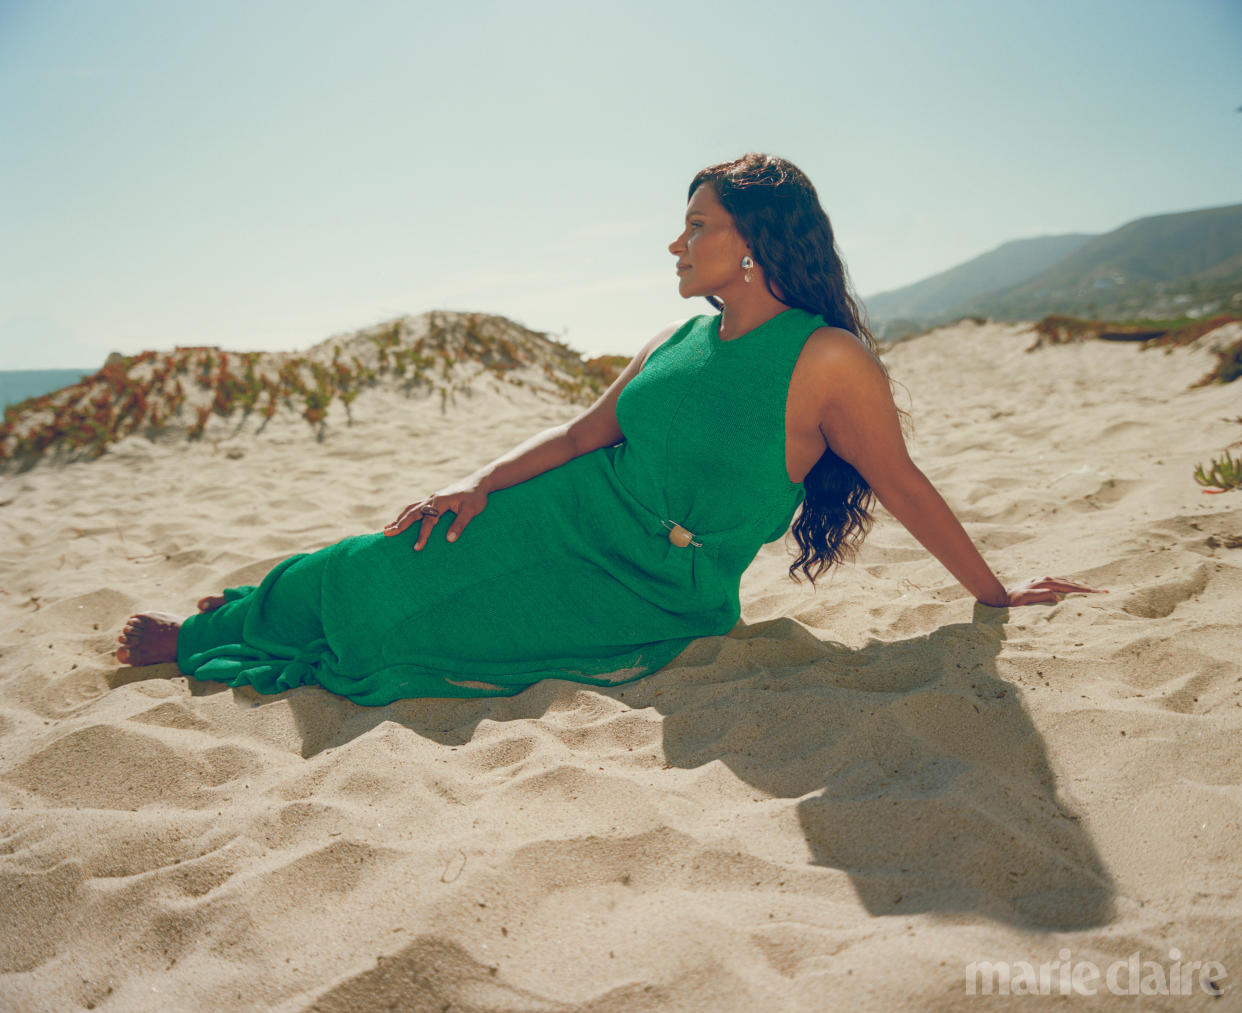 Mindy Kaling in a green dress lounging in the sand. (Photo: Kanya Iwana for Marie Claire)